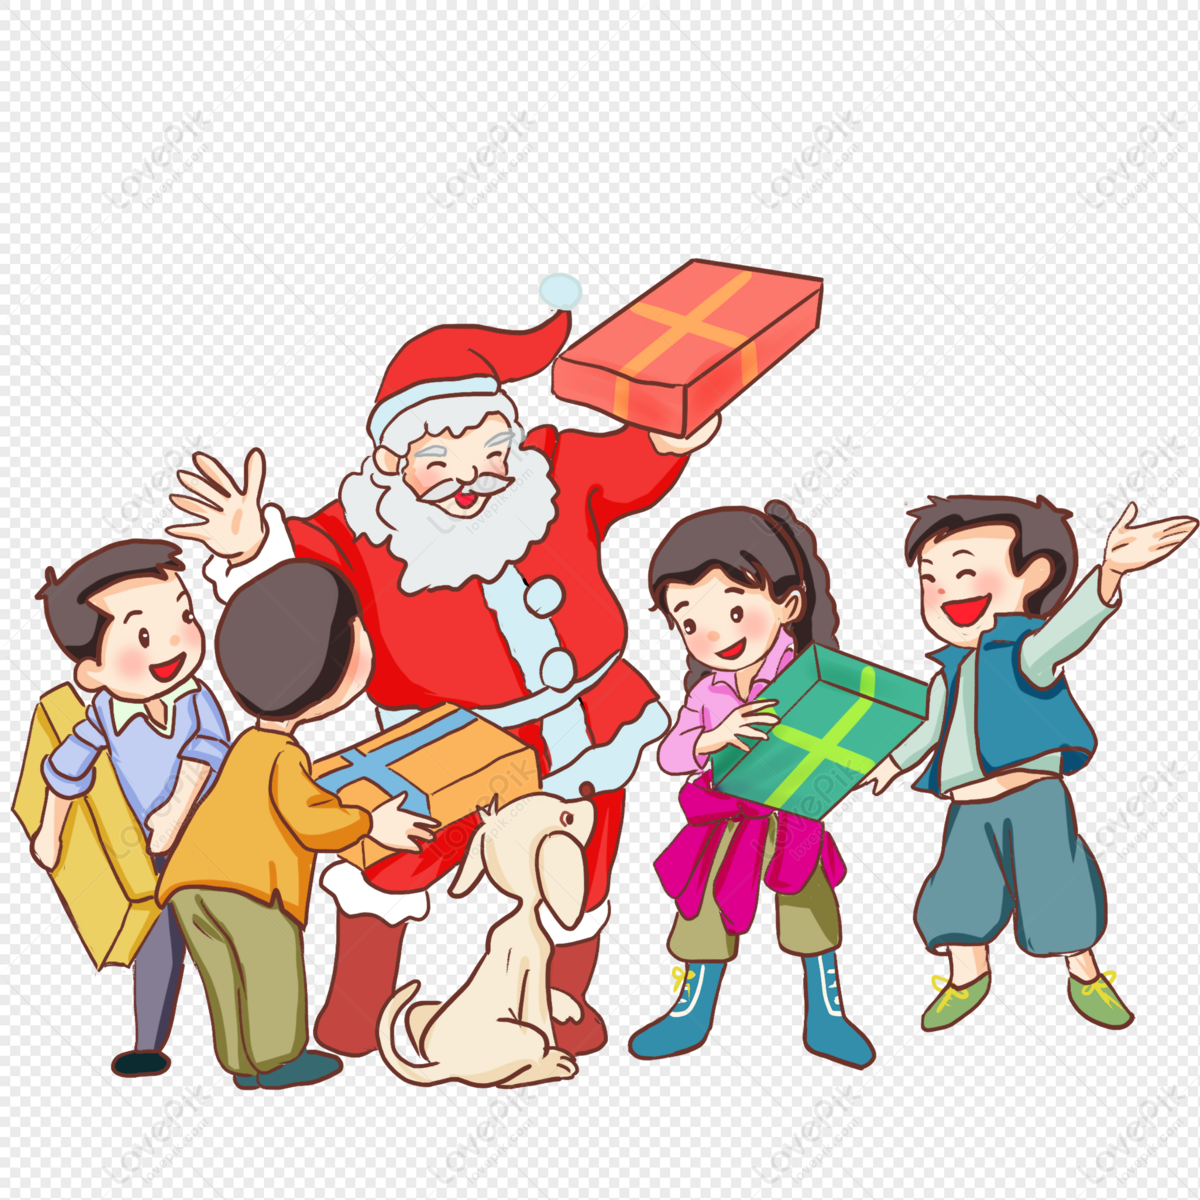 Santa Claus And Children PNG Transparent Background And Clipart Image ...